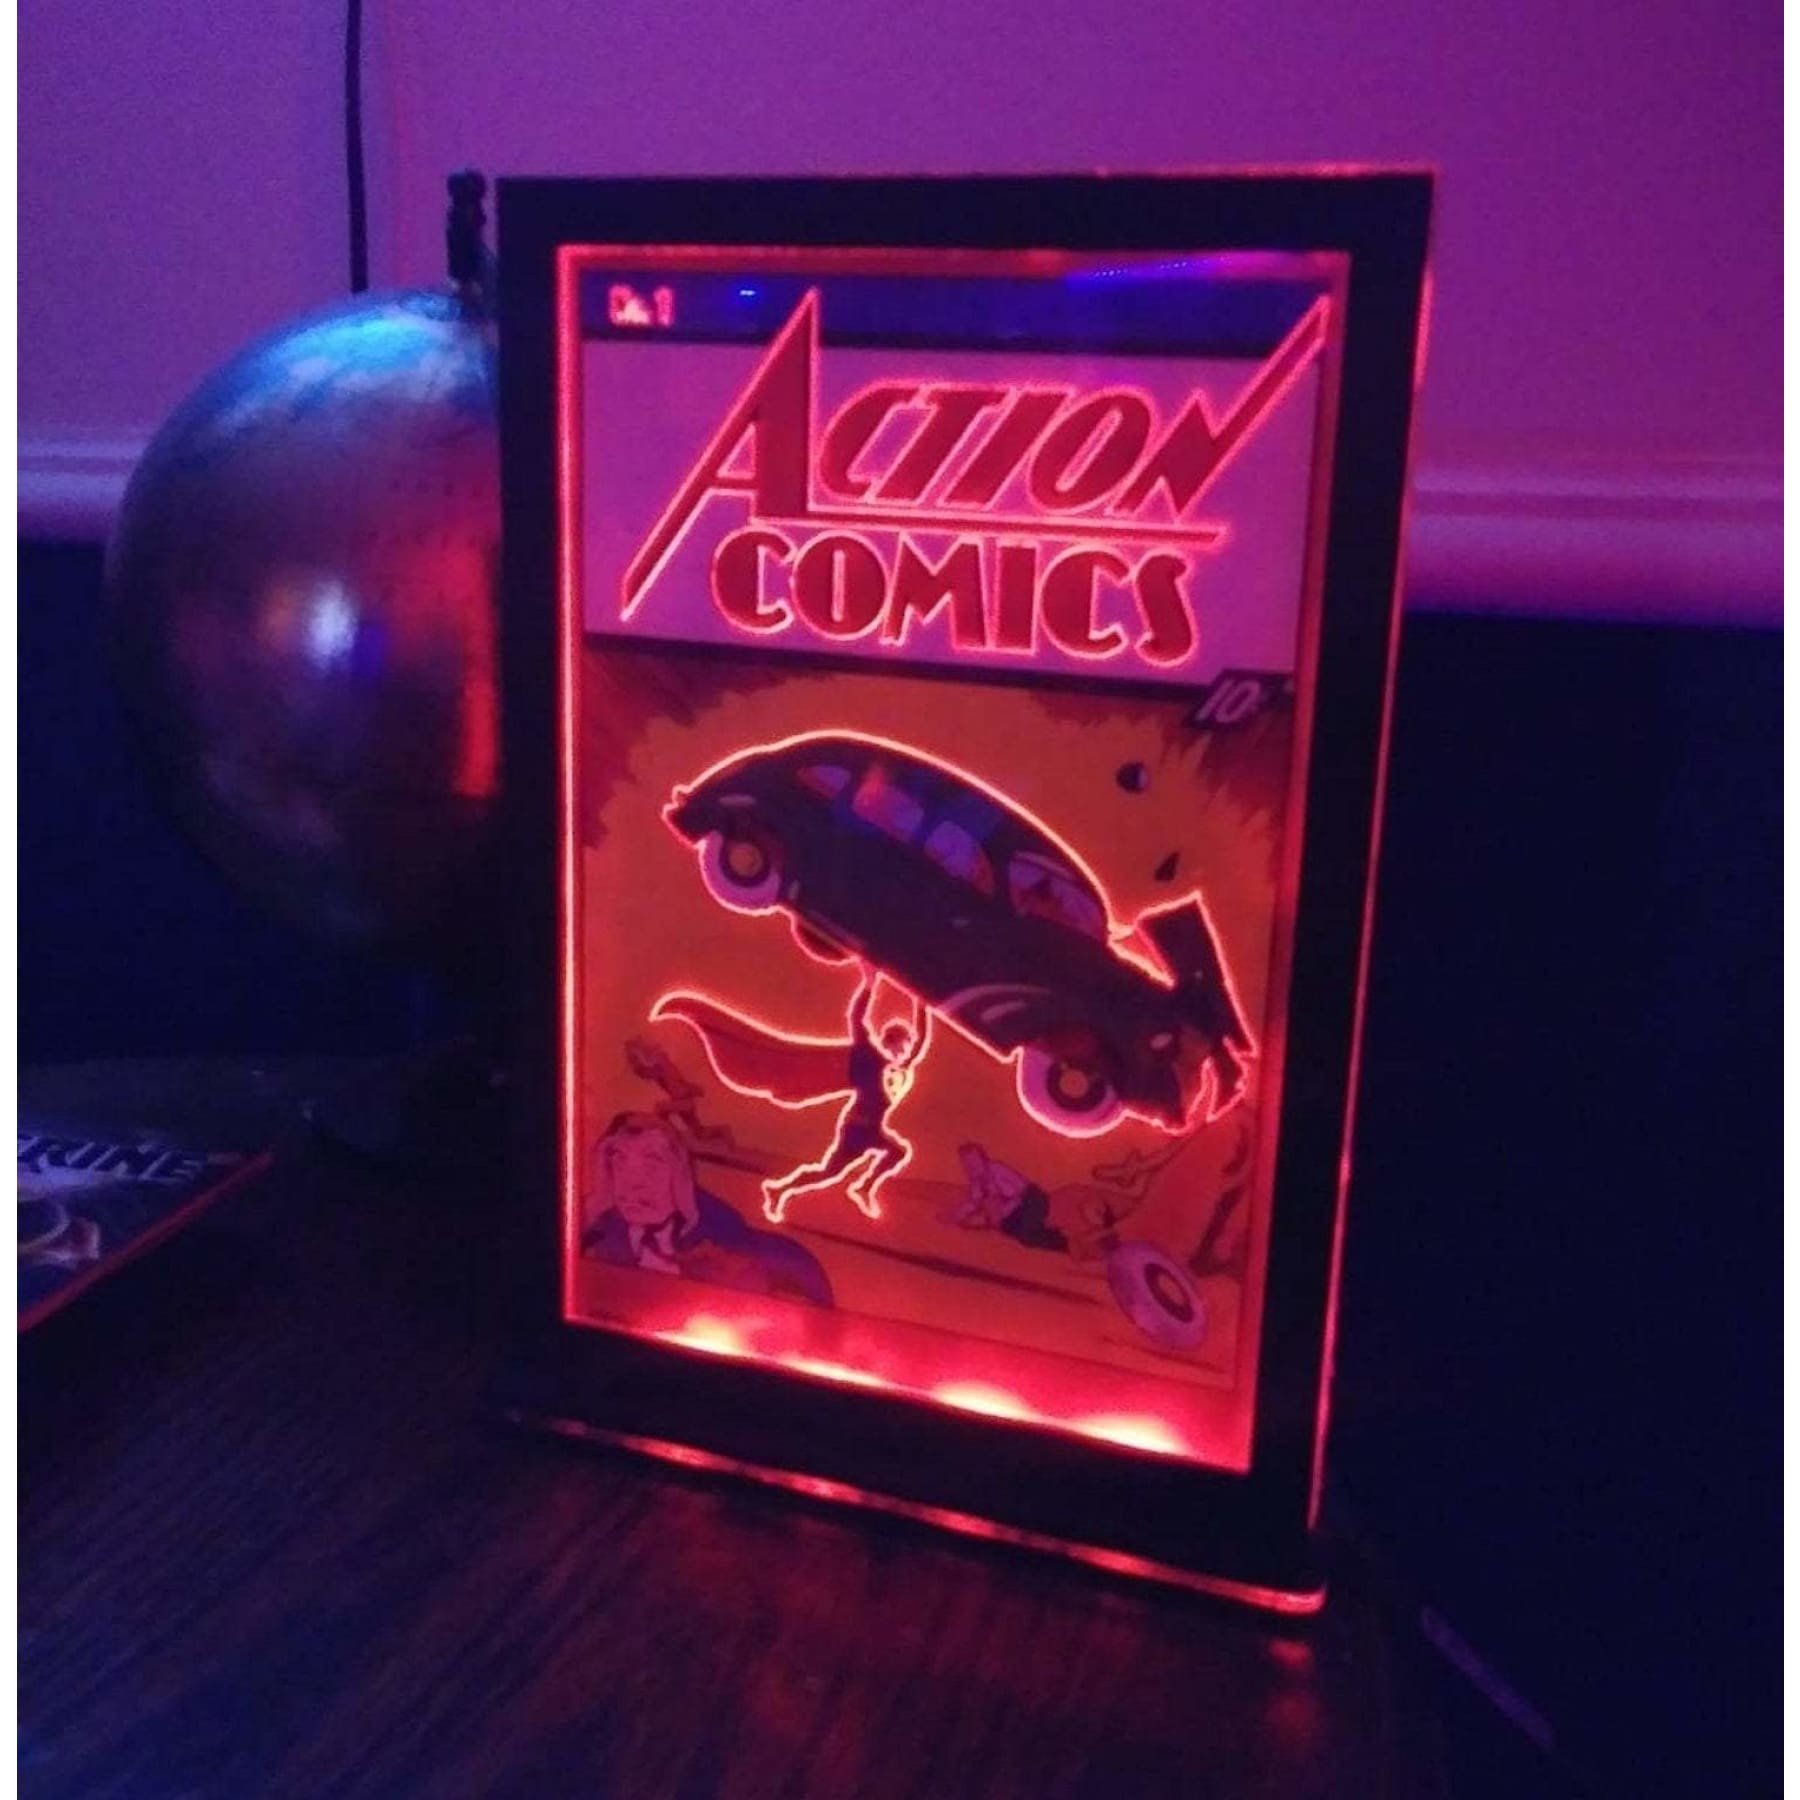 15x10" Acrylic LED Comic Poster Display Custom made for any cover you want!